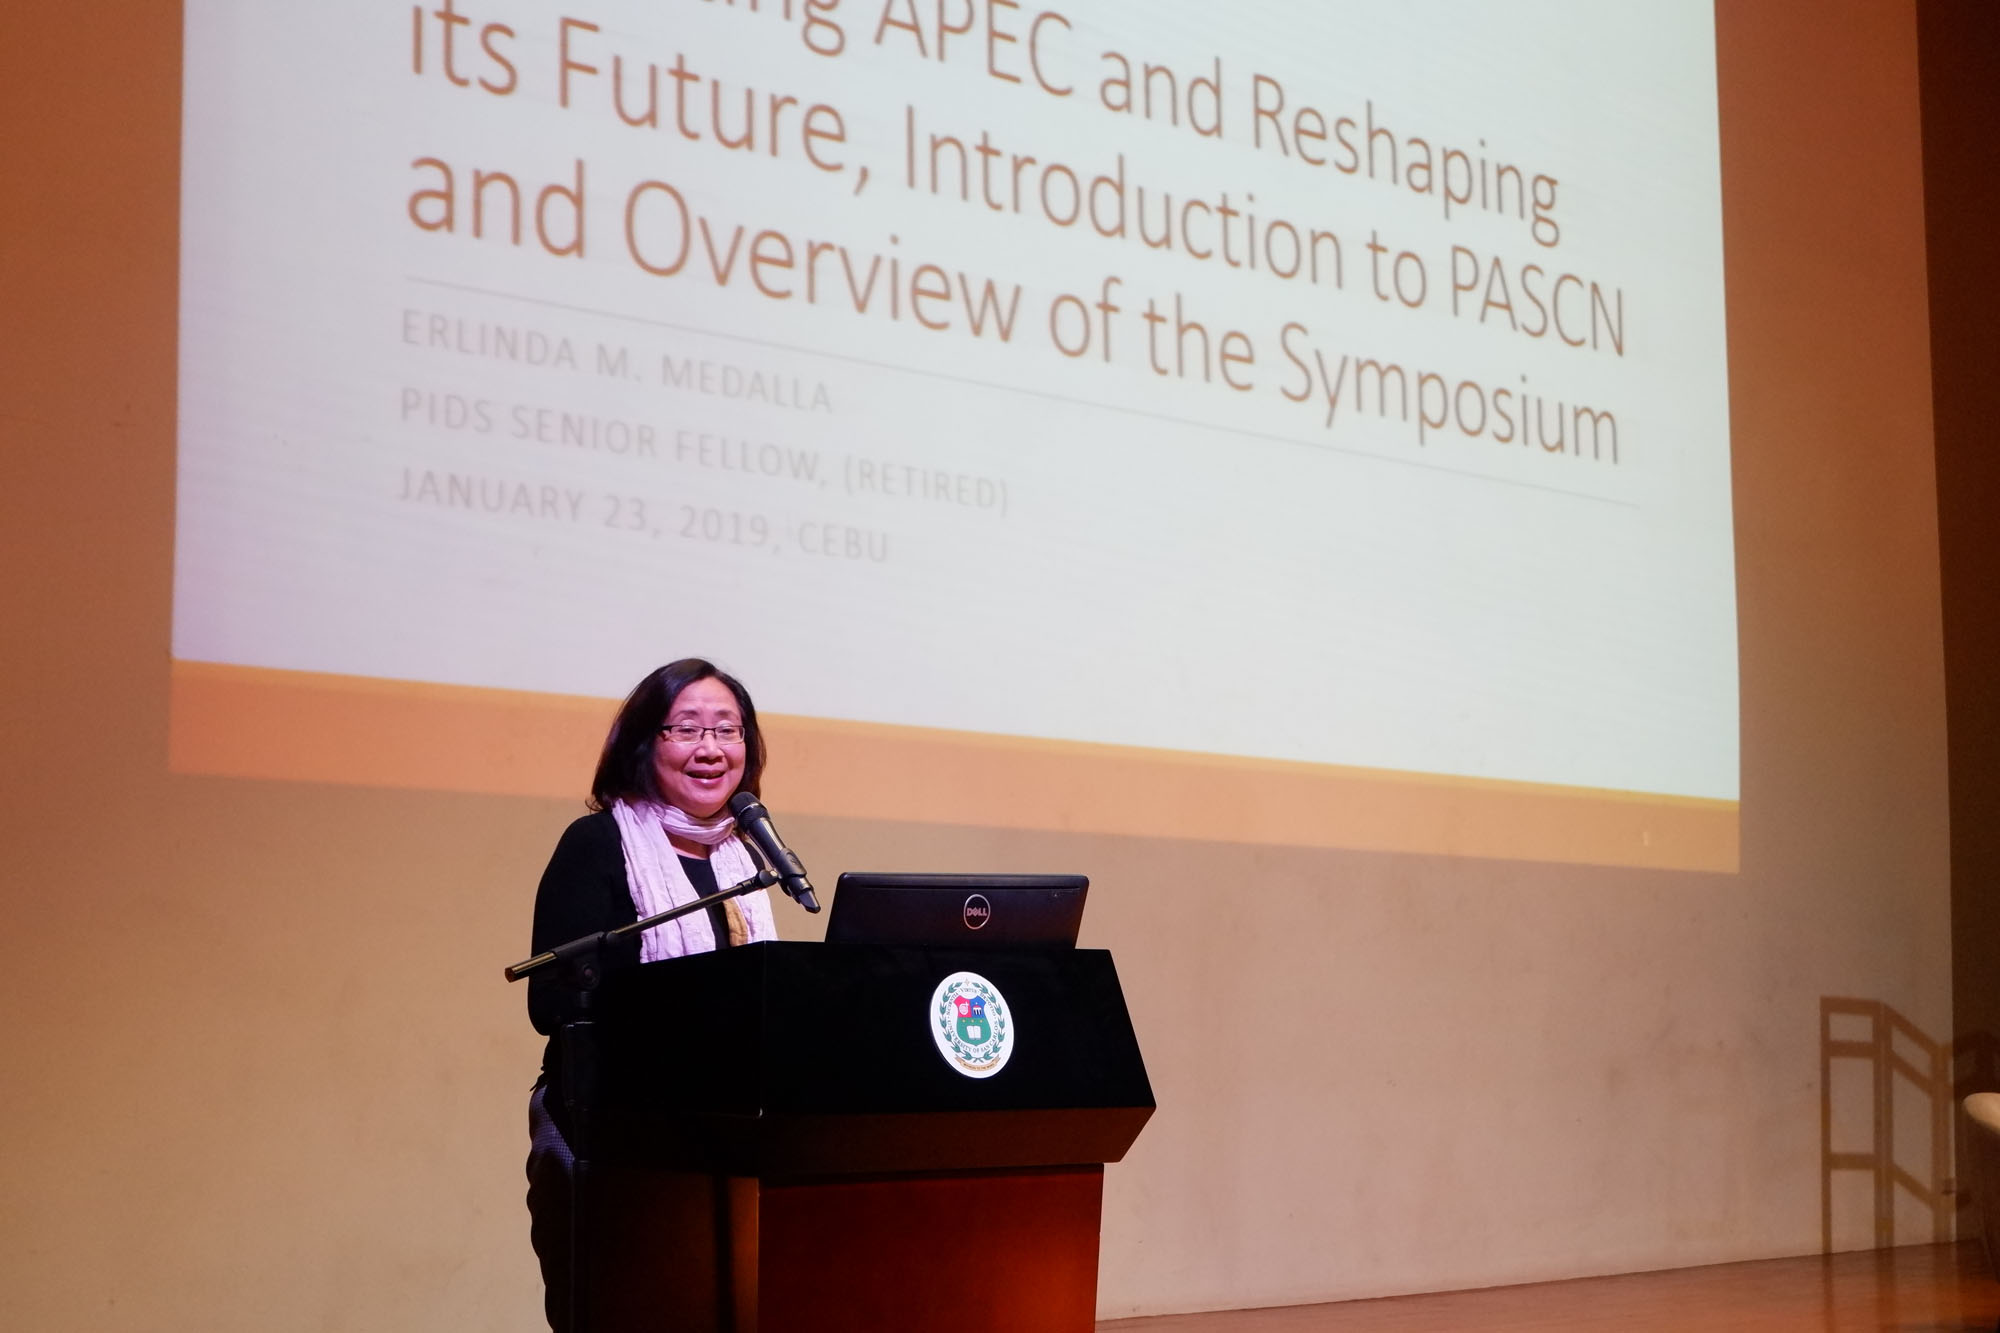 PASCN Regional Symposium on Disruptive Technologies: Opportunities, Challenges, and Risks-pascn-usc-16-20190123.jpg